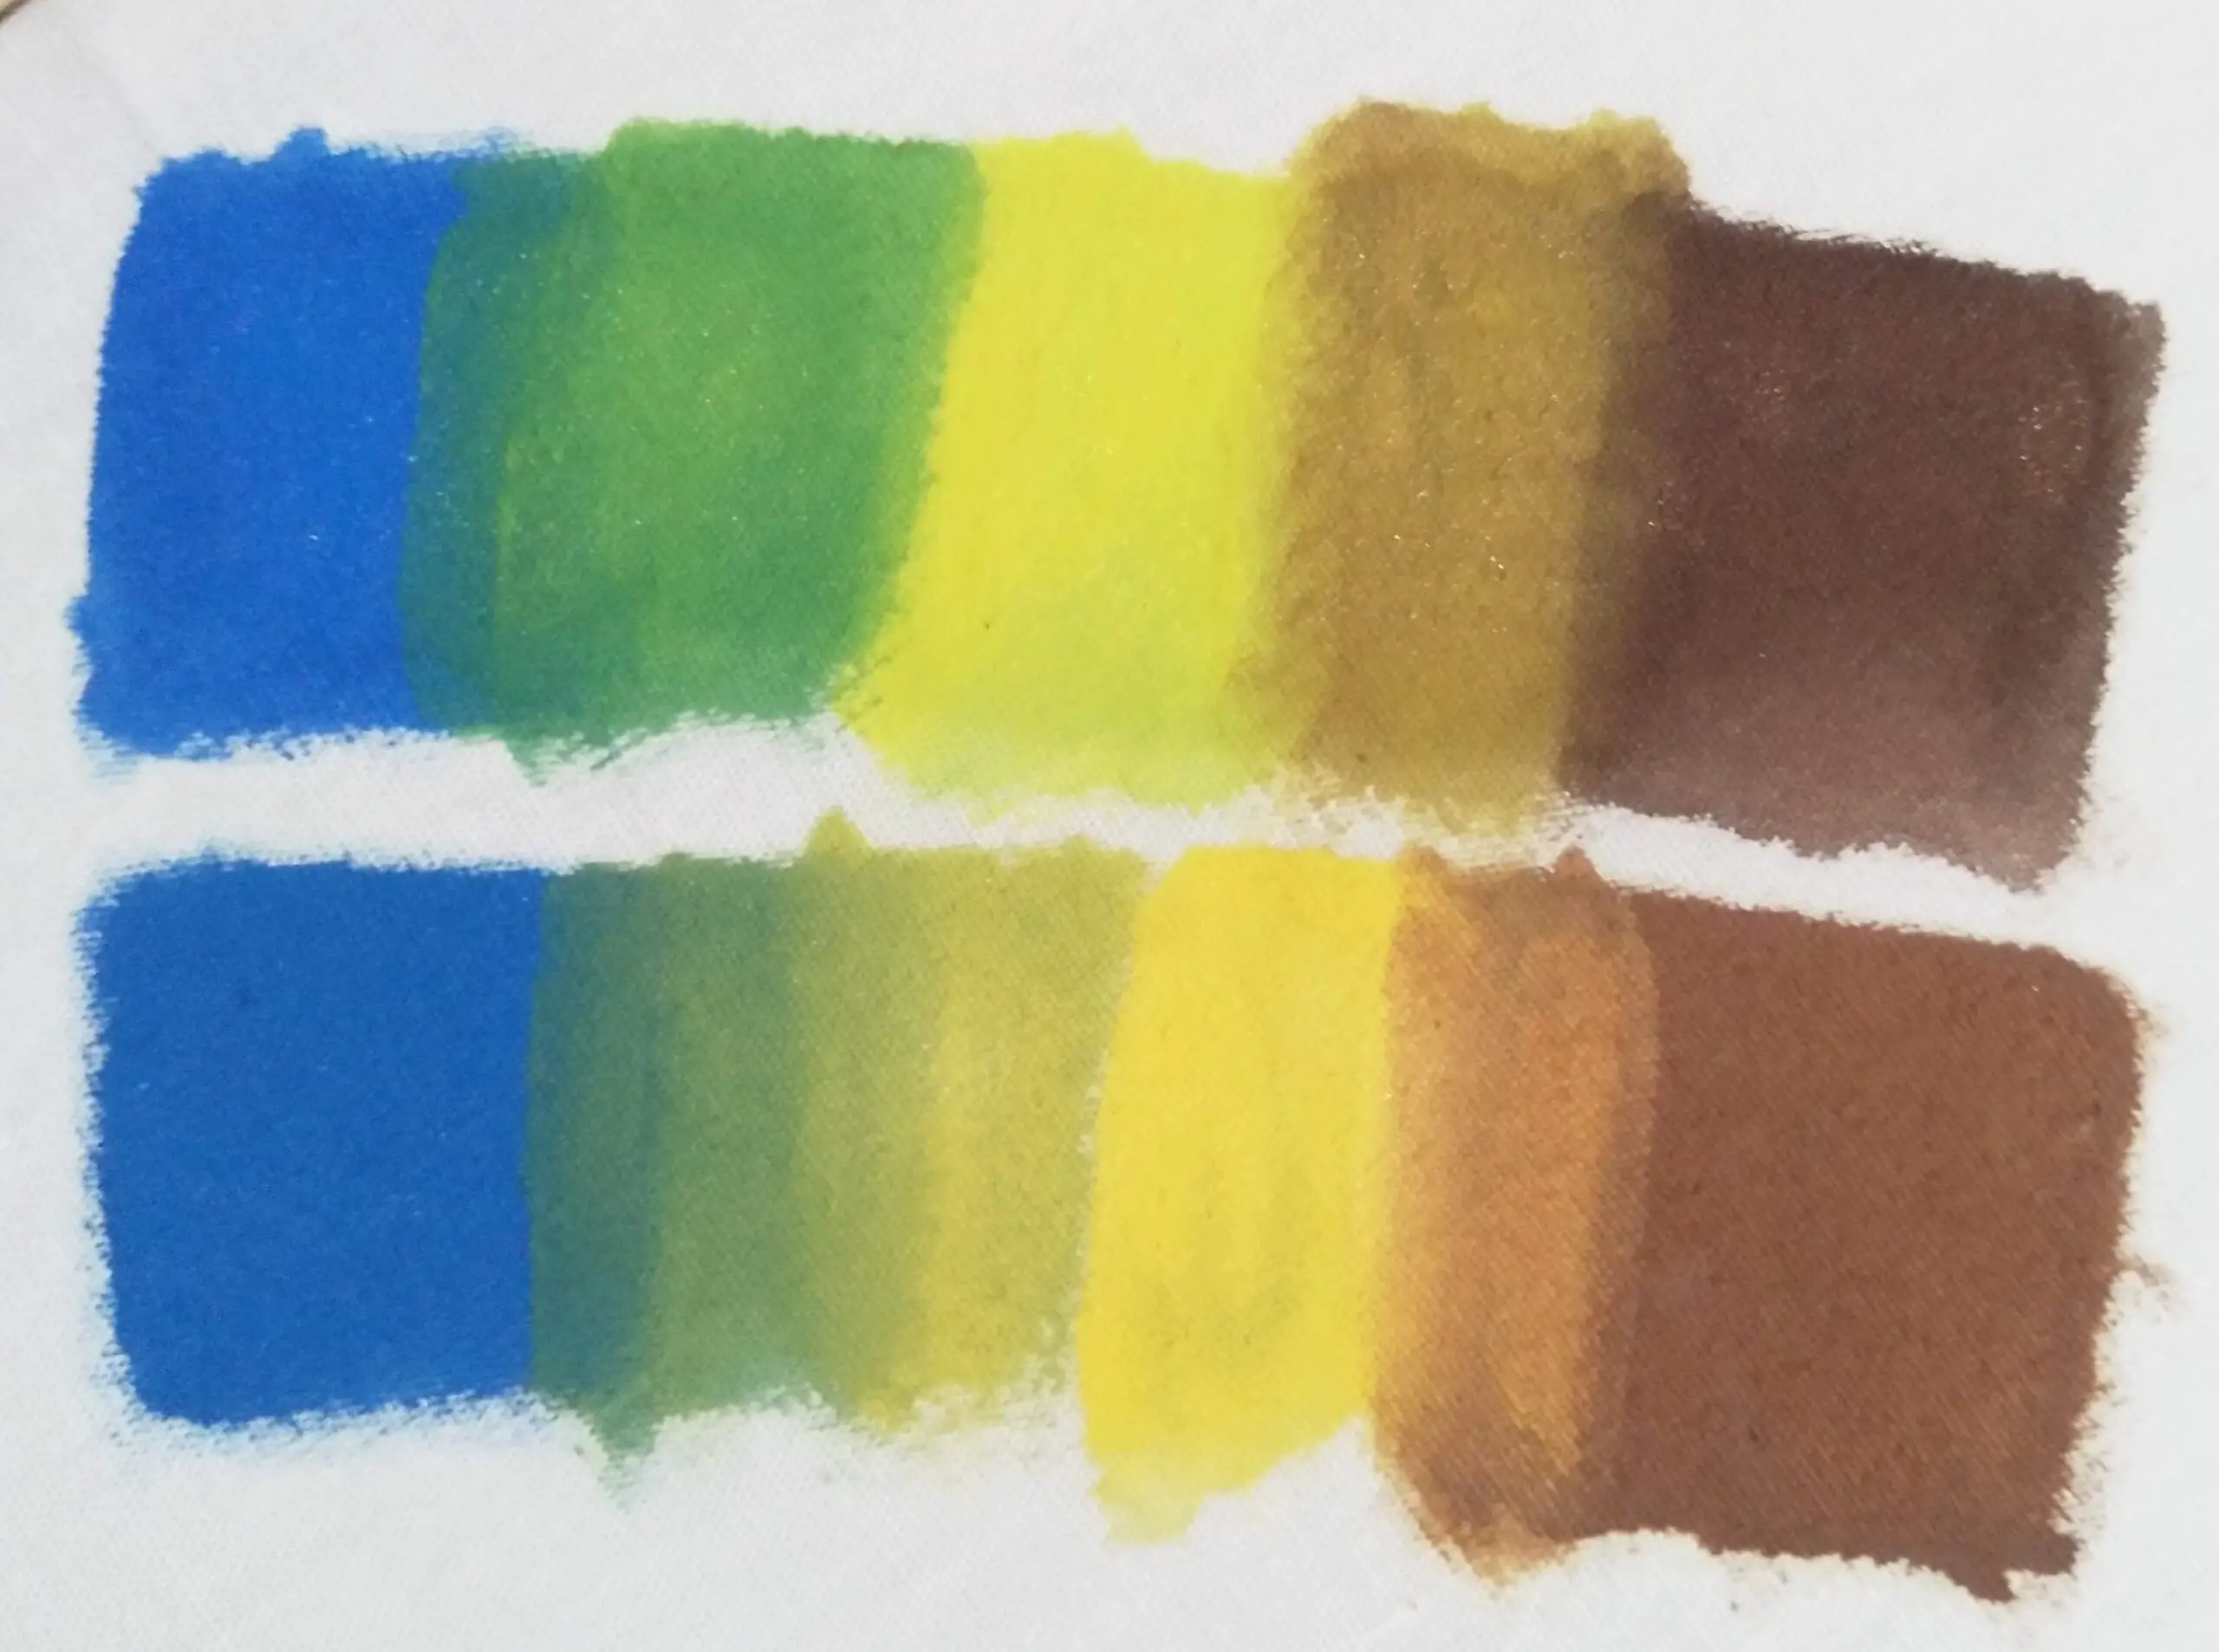 Acrylic Paint vs. Fabric Paint: All you need to know